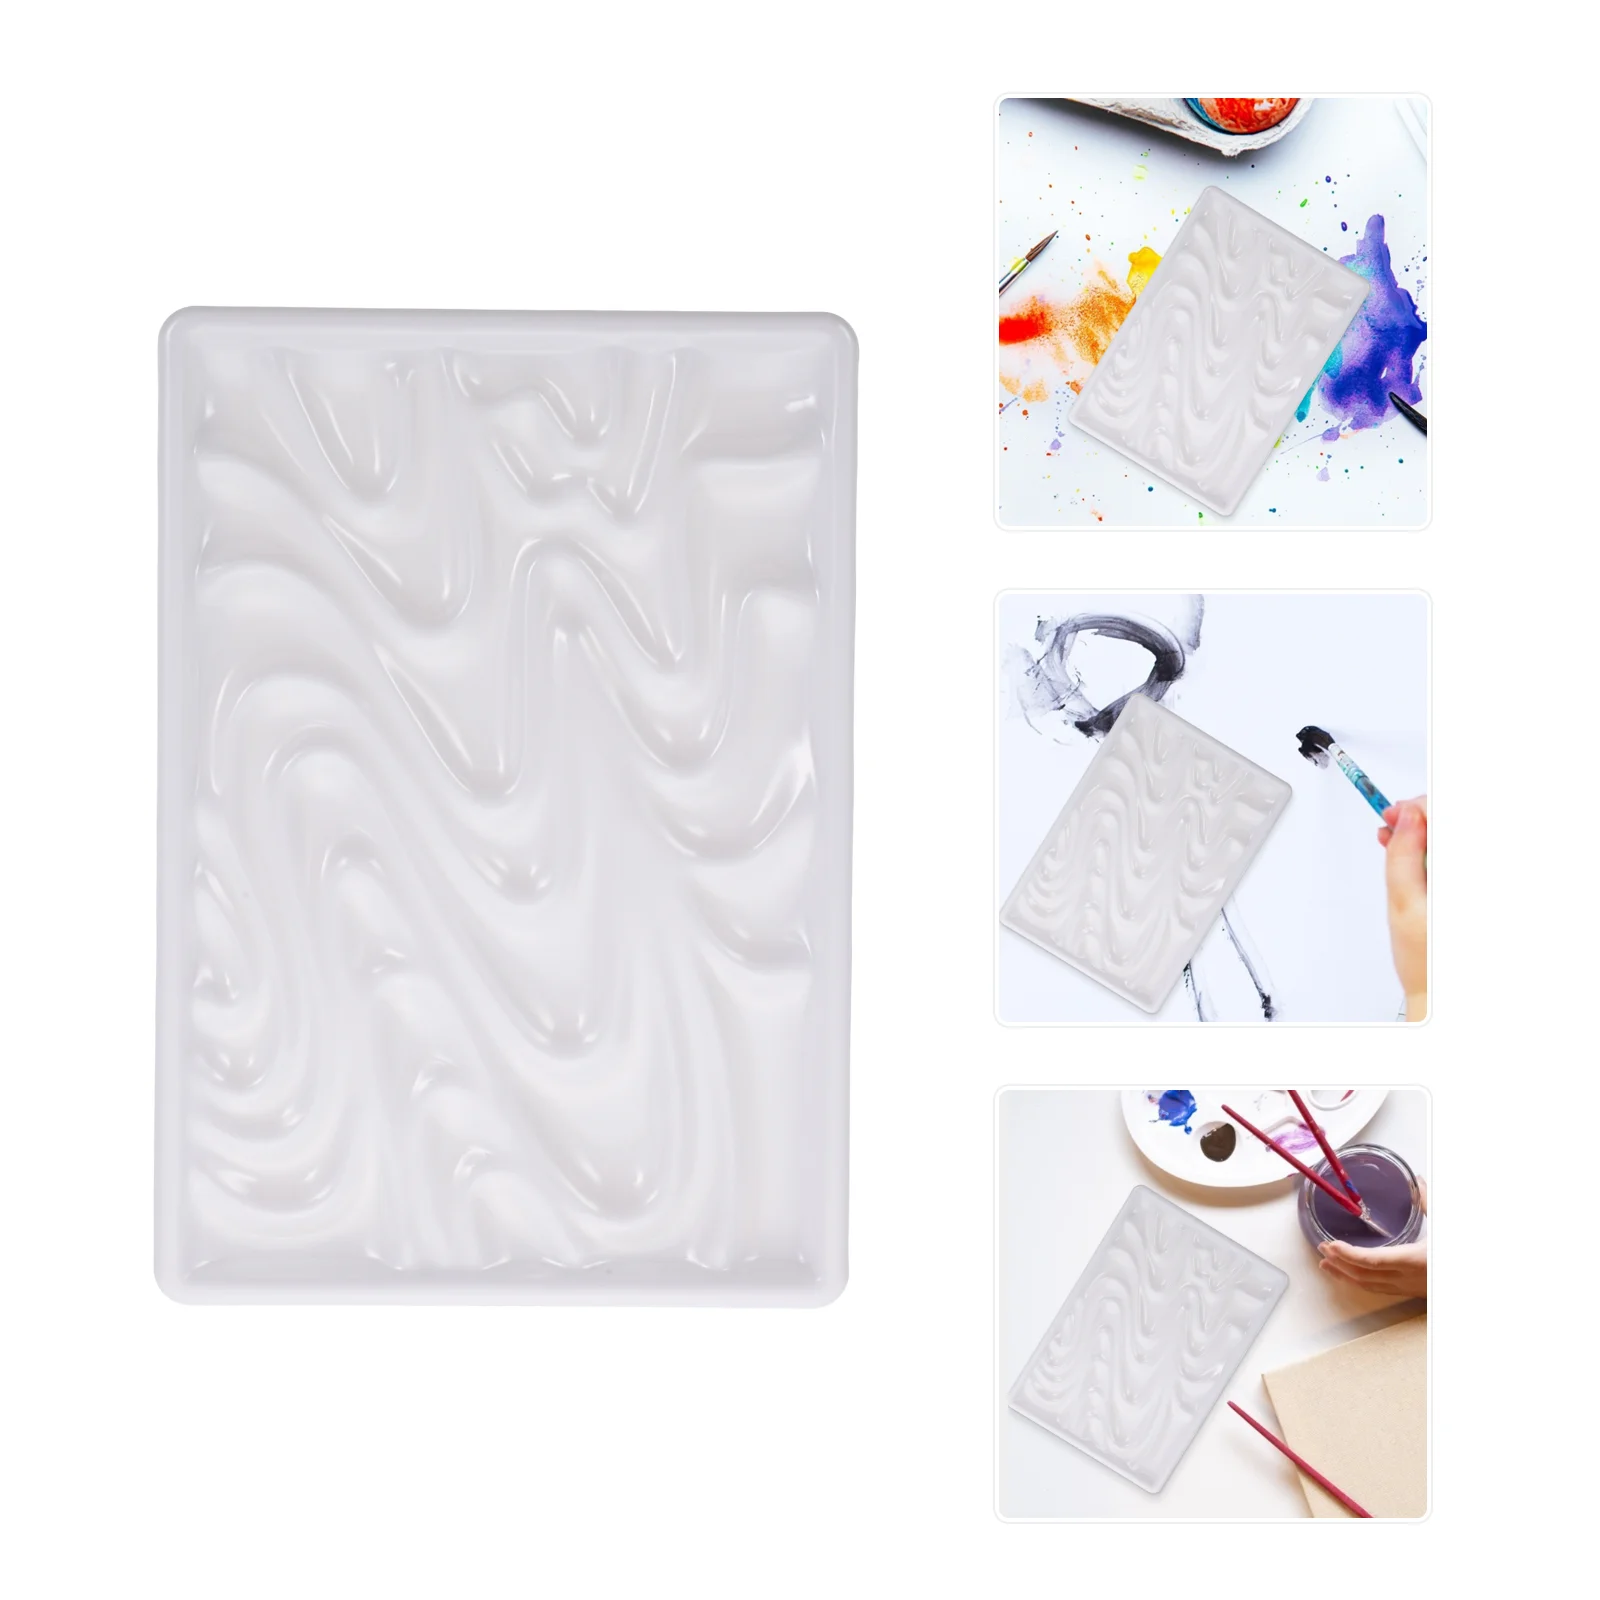 

Tray Watercolor Pallet Pigment Plate Mixing Painting Porcelain Color Multi Trays Watercolors Artists Ceramic Kids Holes Oil